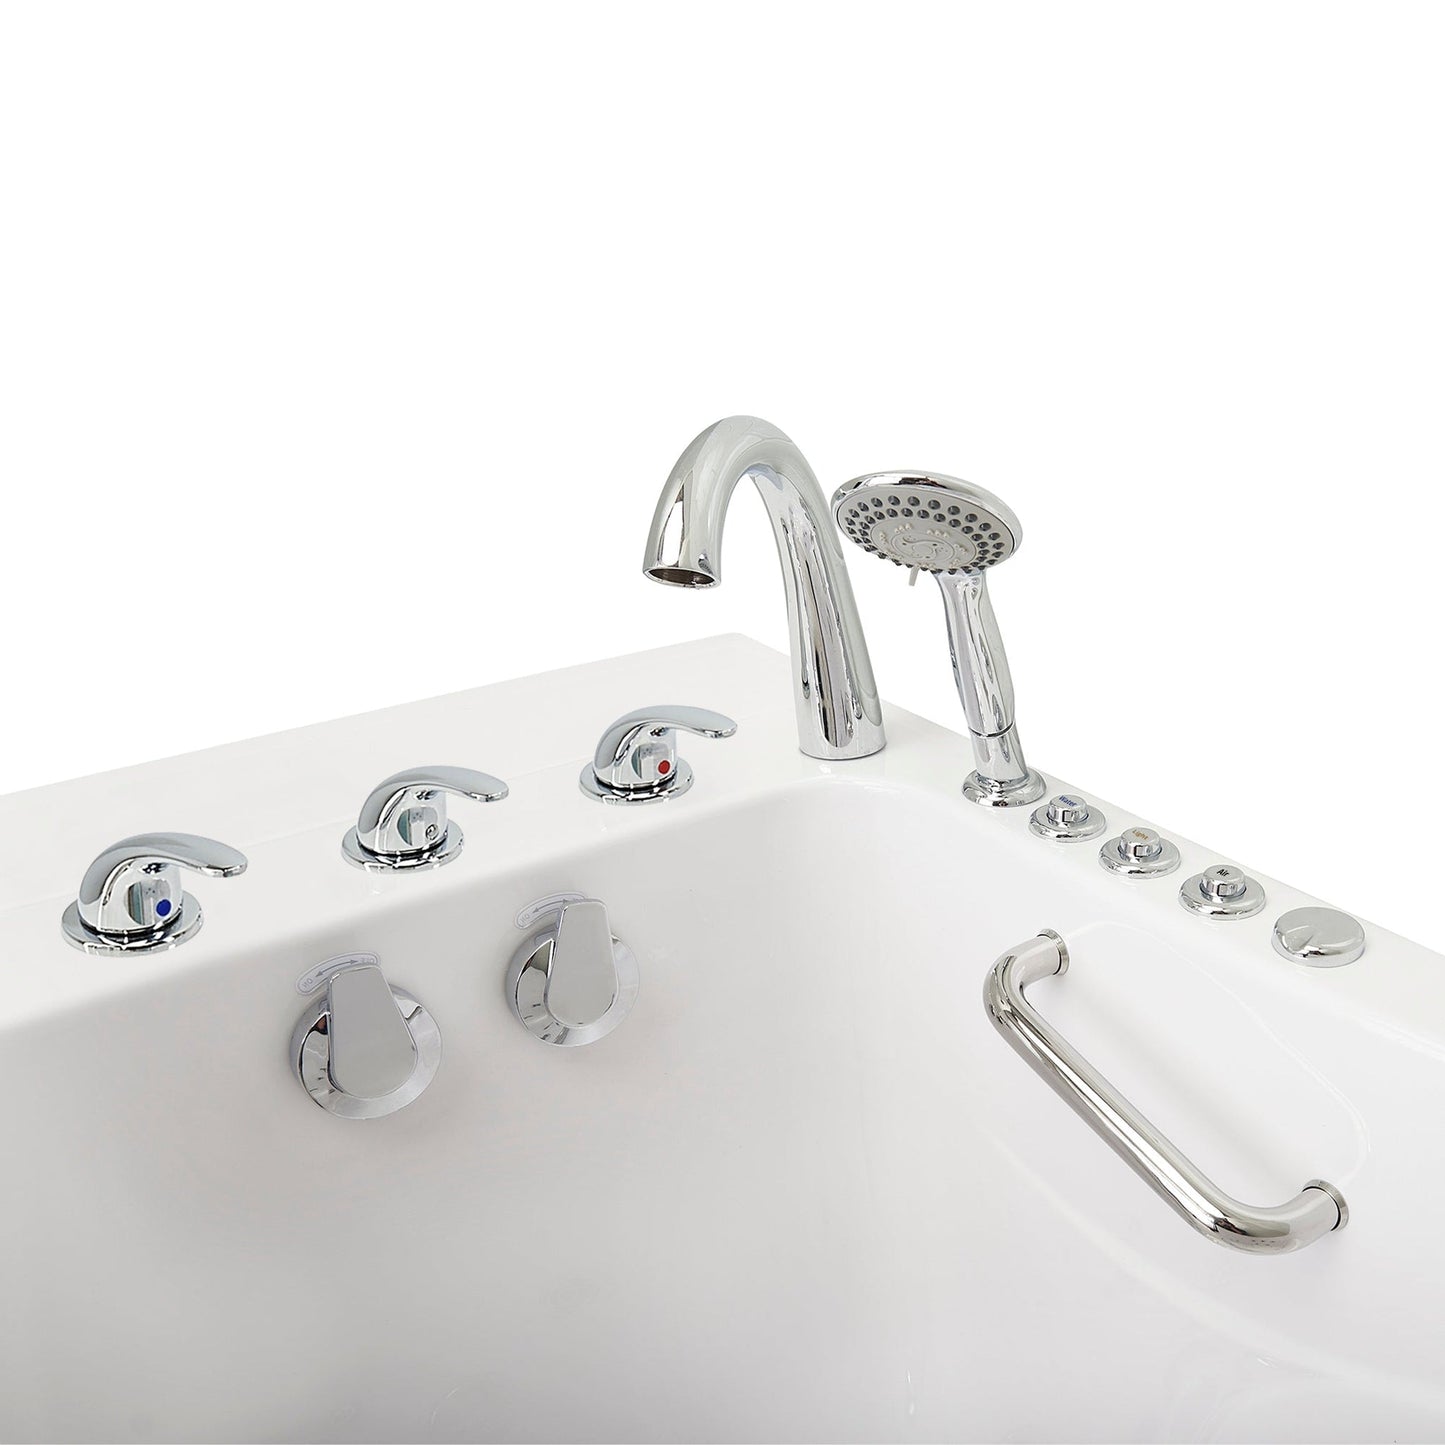 Ella's Bubbles Monaco 32" x 52" White Acrylic Air and Hydro Massage Walk-In Bathtub With 5-Piece Fast Fill Faucet, 2" Dual Drain and Right Outward Swing Door